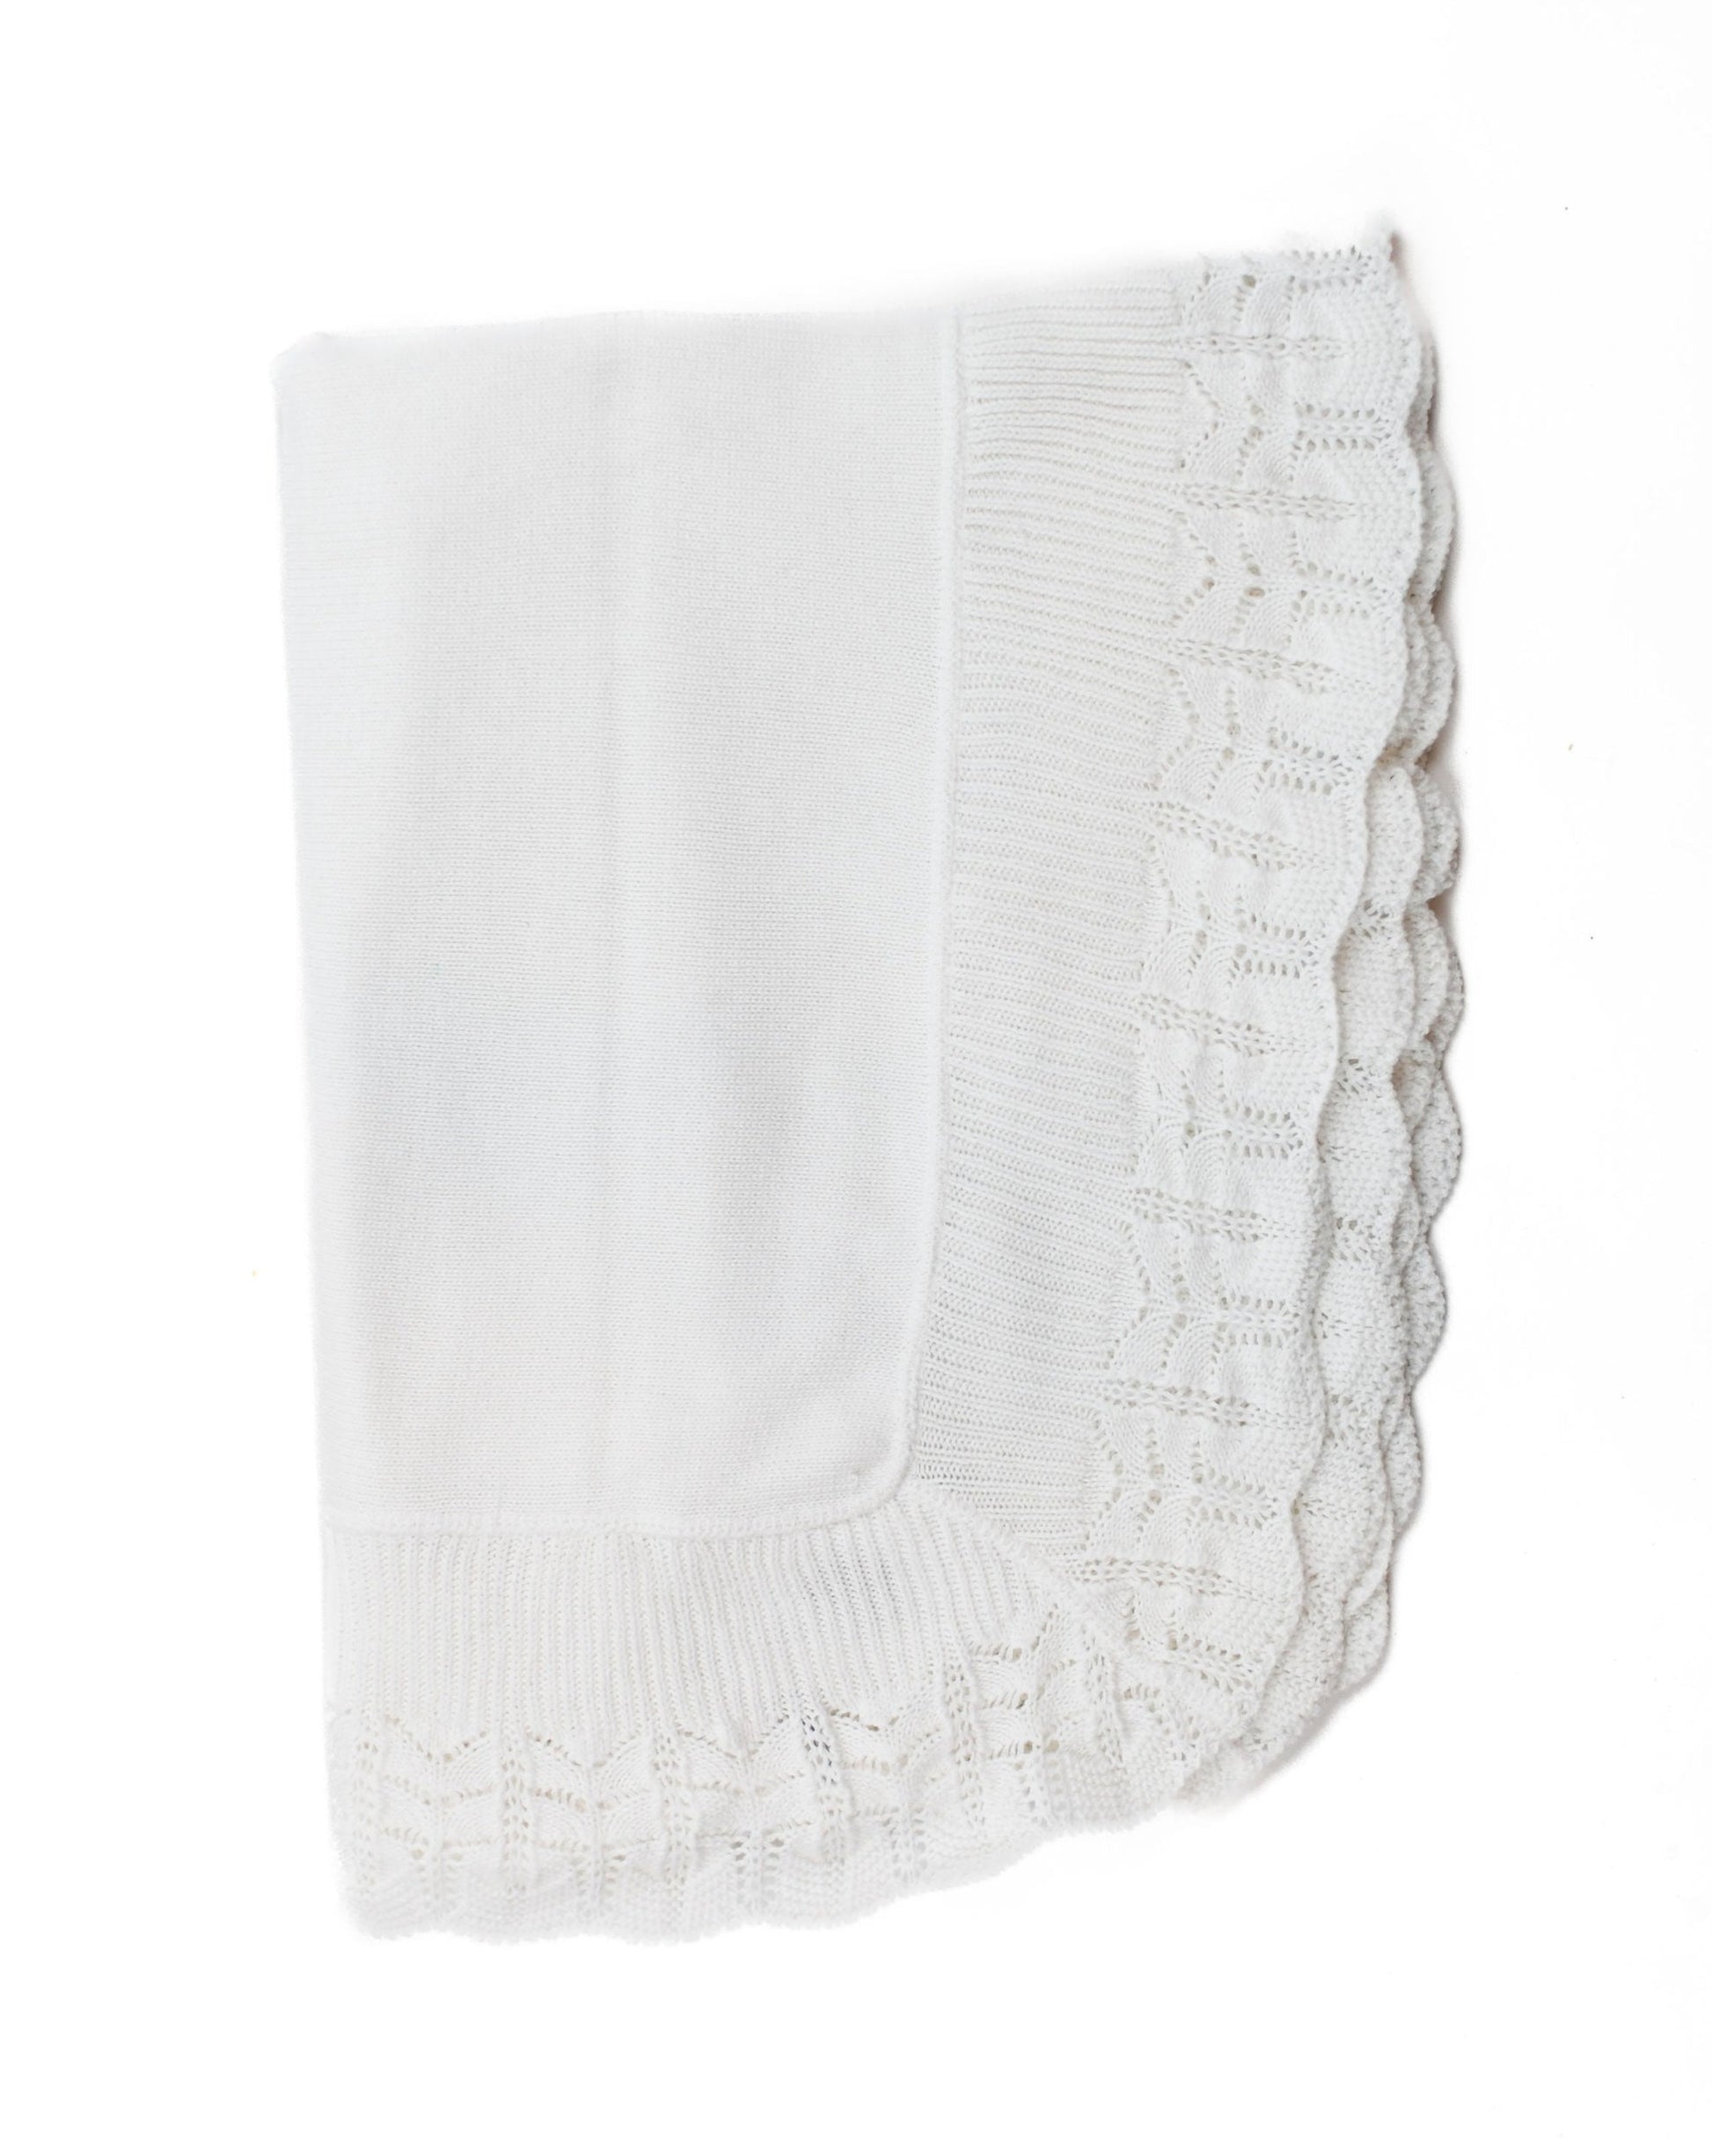 Cotton Jersey Baby Blanket with Knitted Scallop Lace Border made by A Soft Idea.